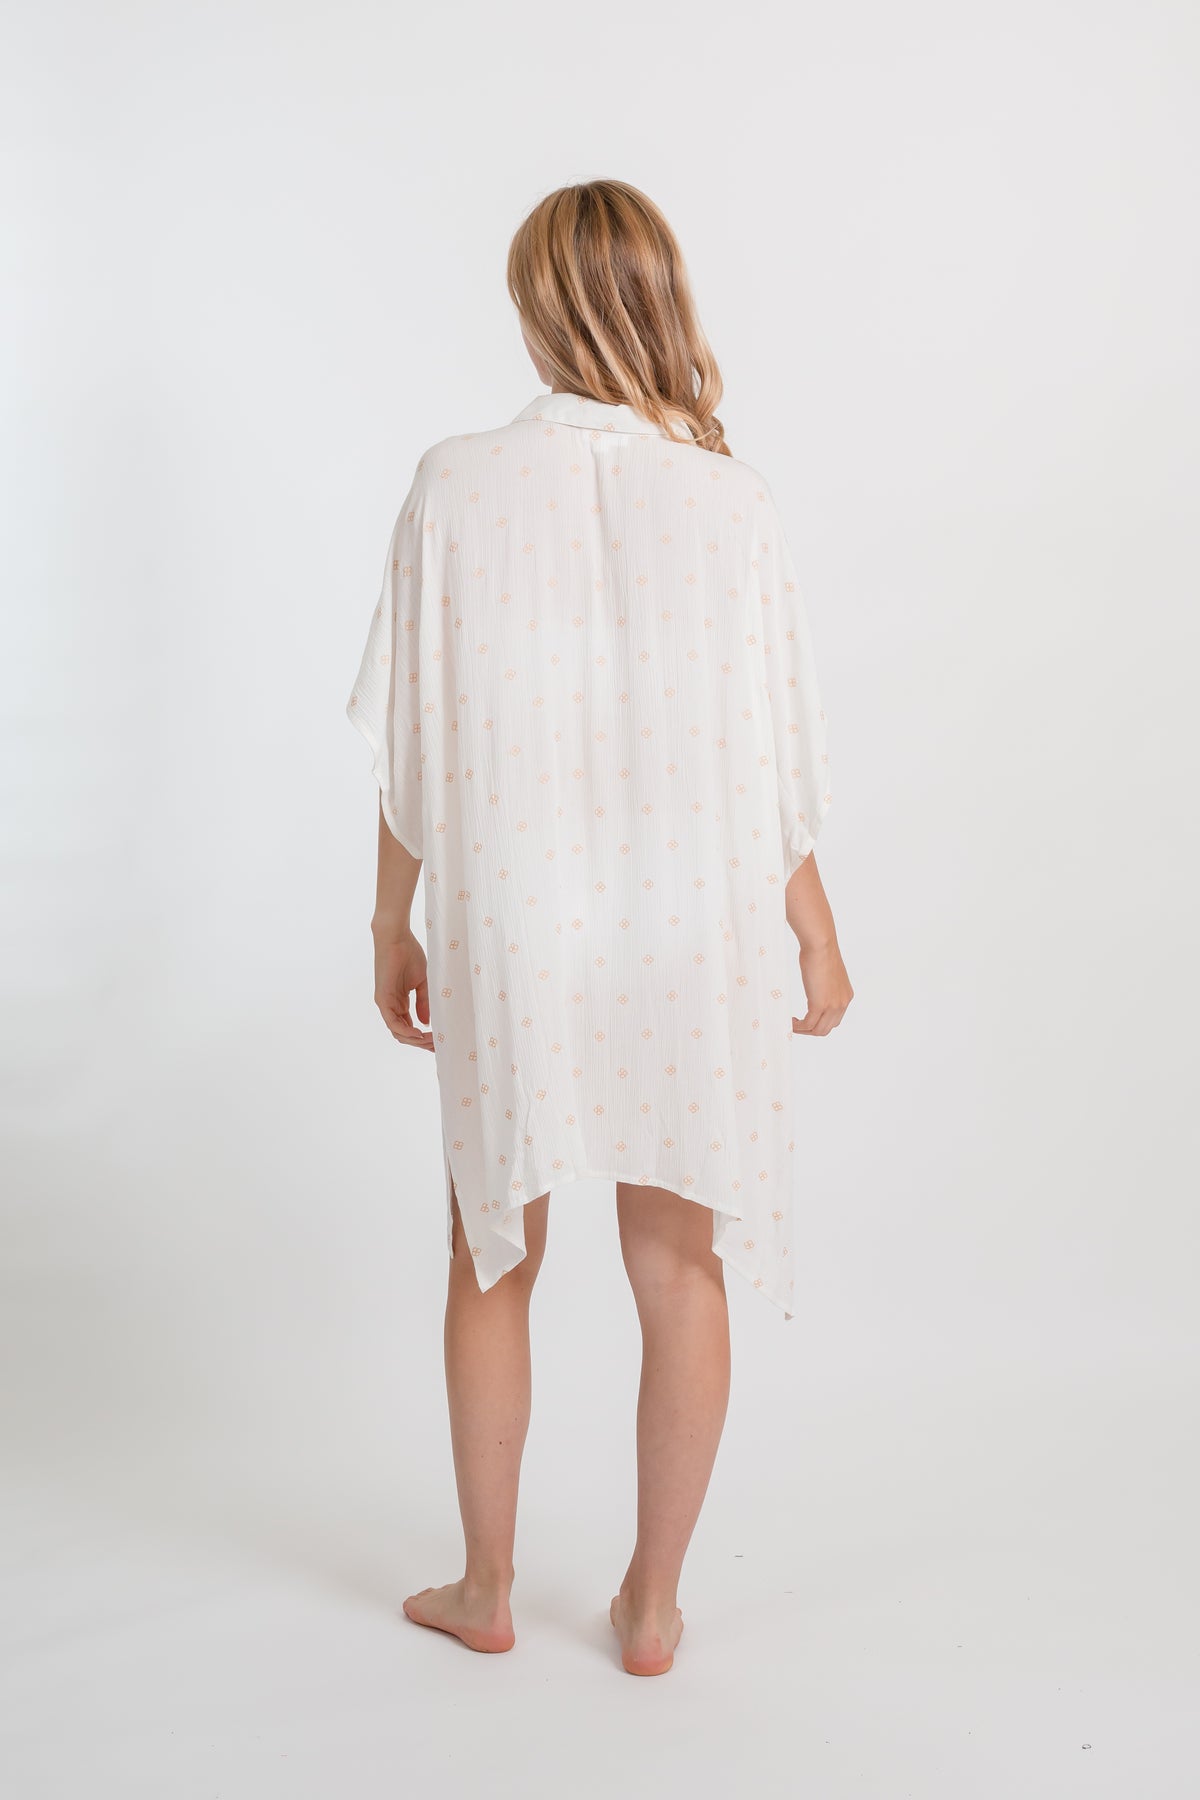 the back of a blonde hair female model wearing a white with gold dot print big shirt dress